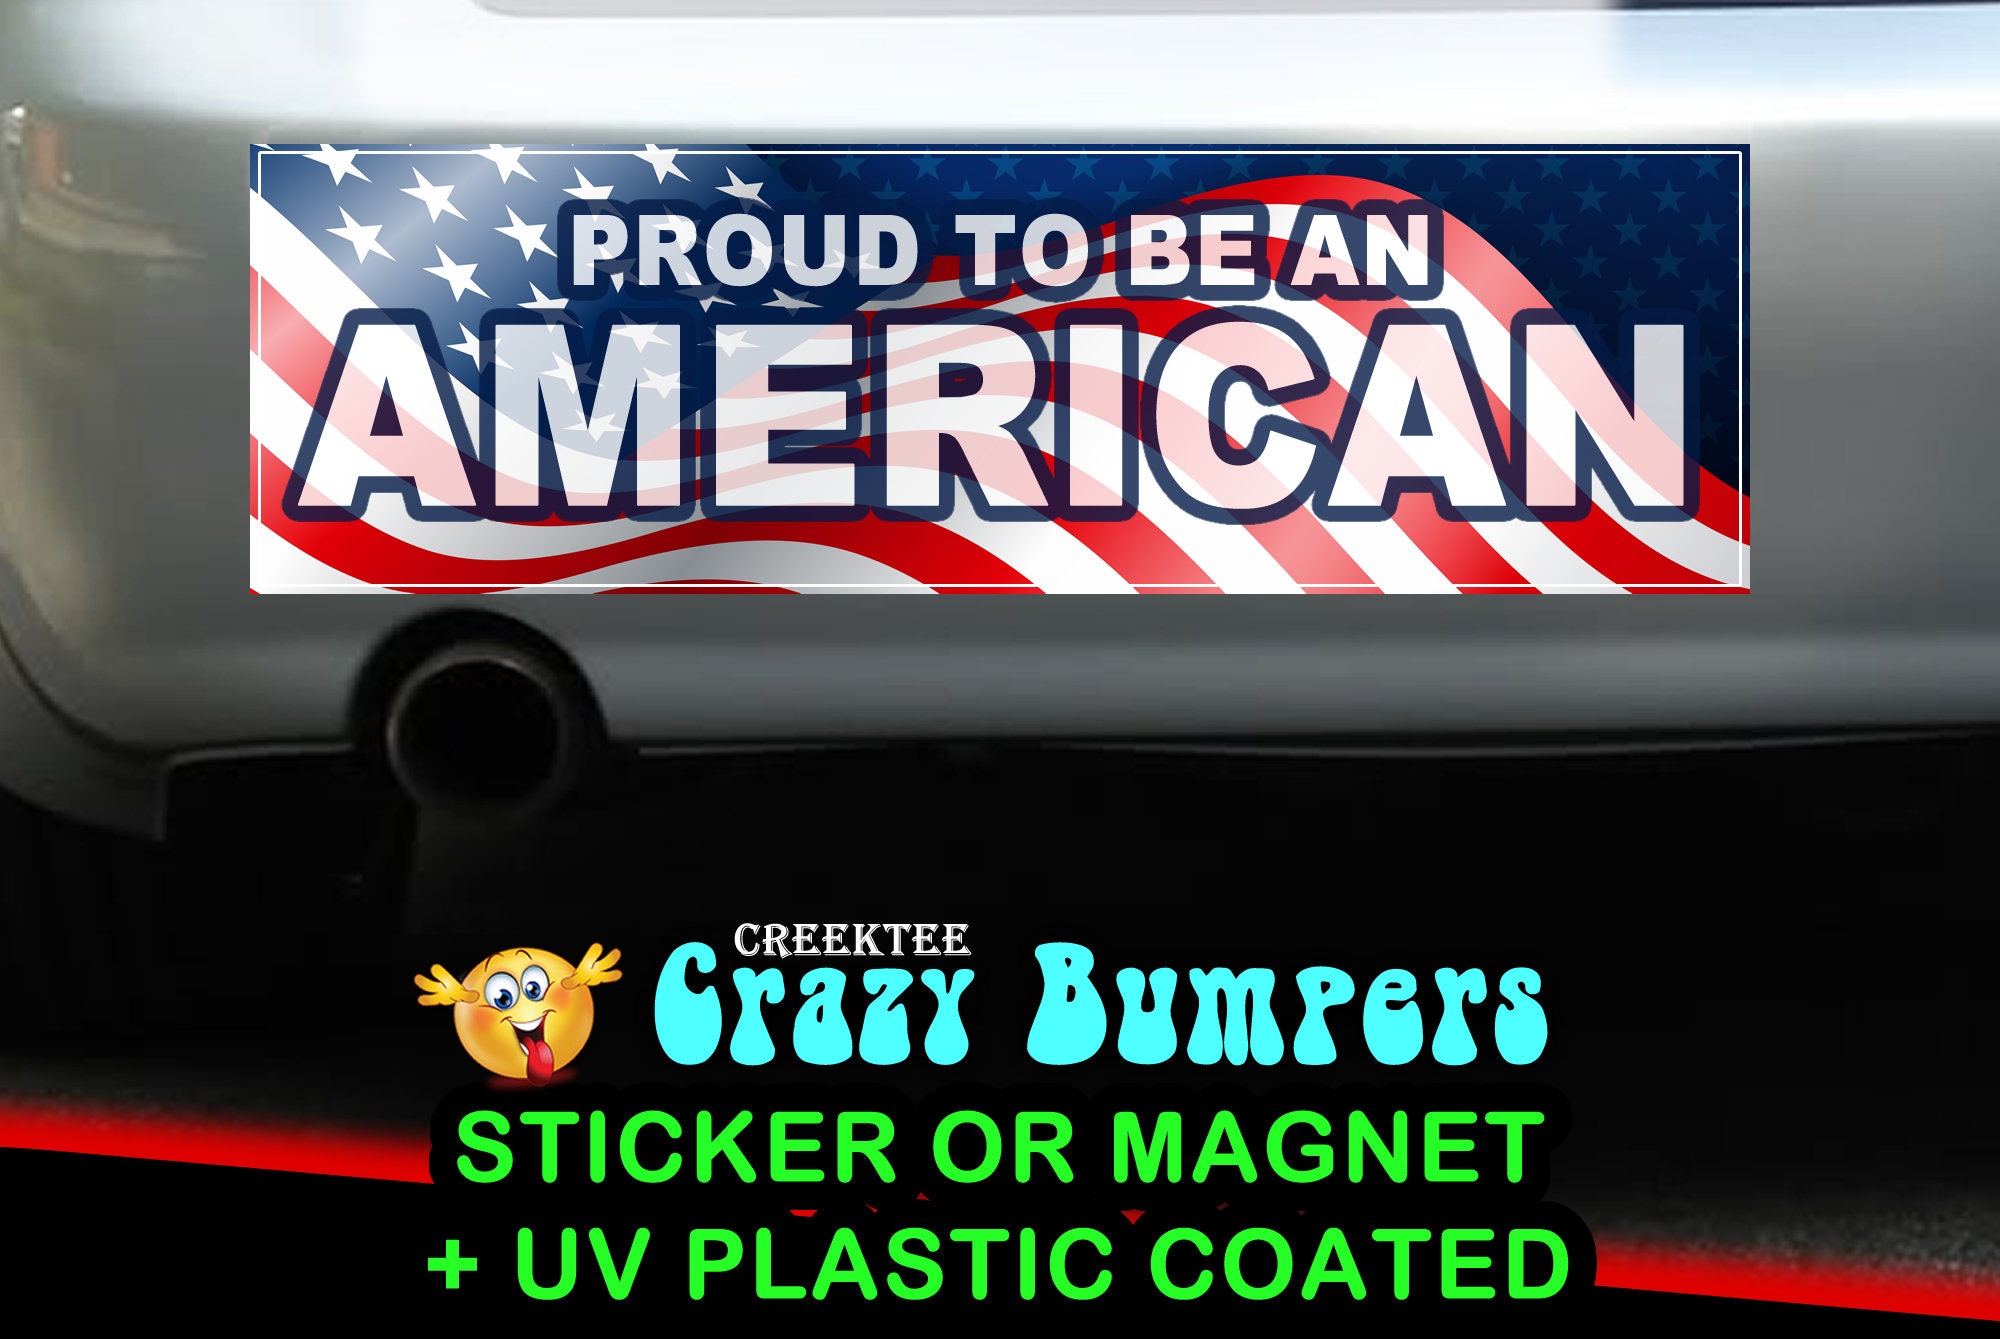 Proud To Be An American sticker or magnet, 9 x 2.7 or 10 x 3 Sticker Magnet or bumper sticker or bumper magnet